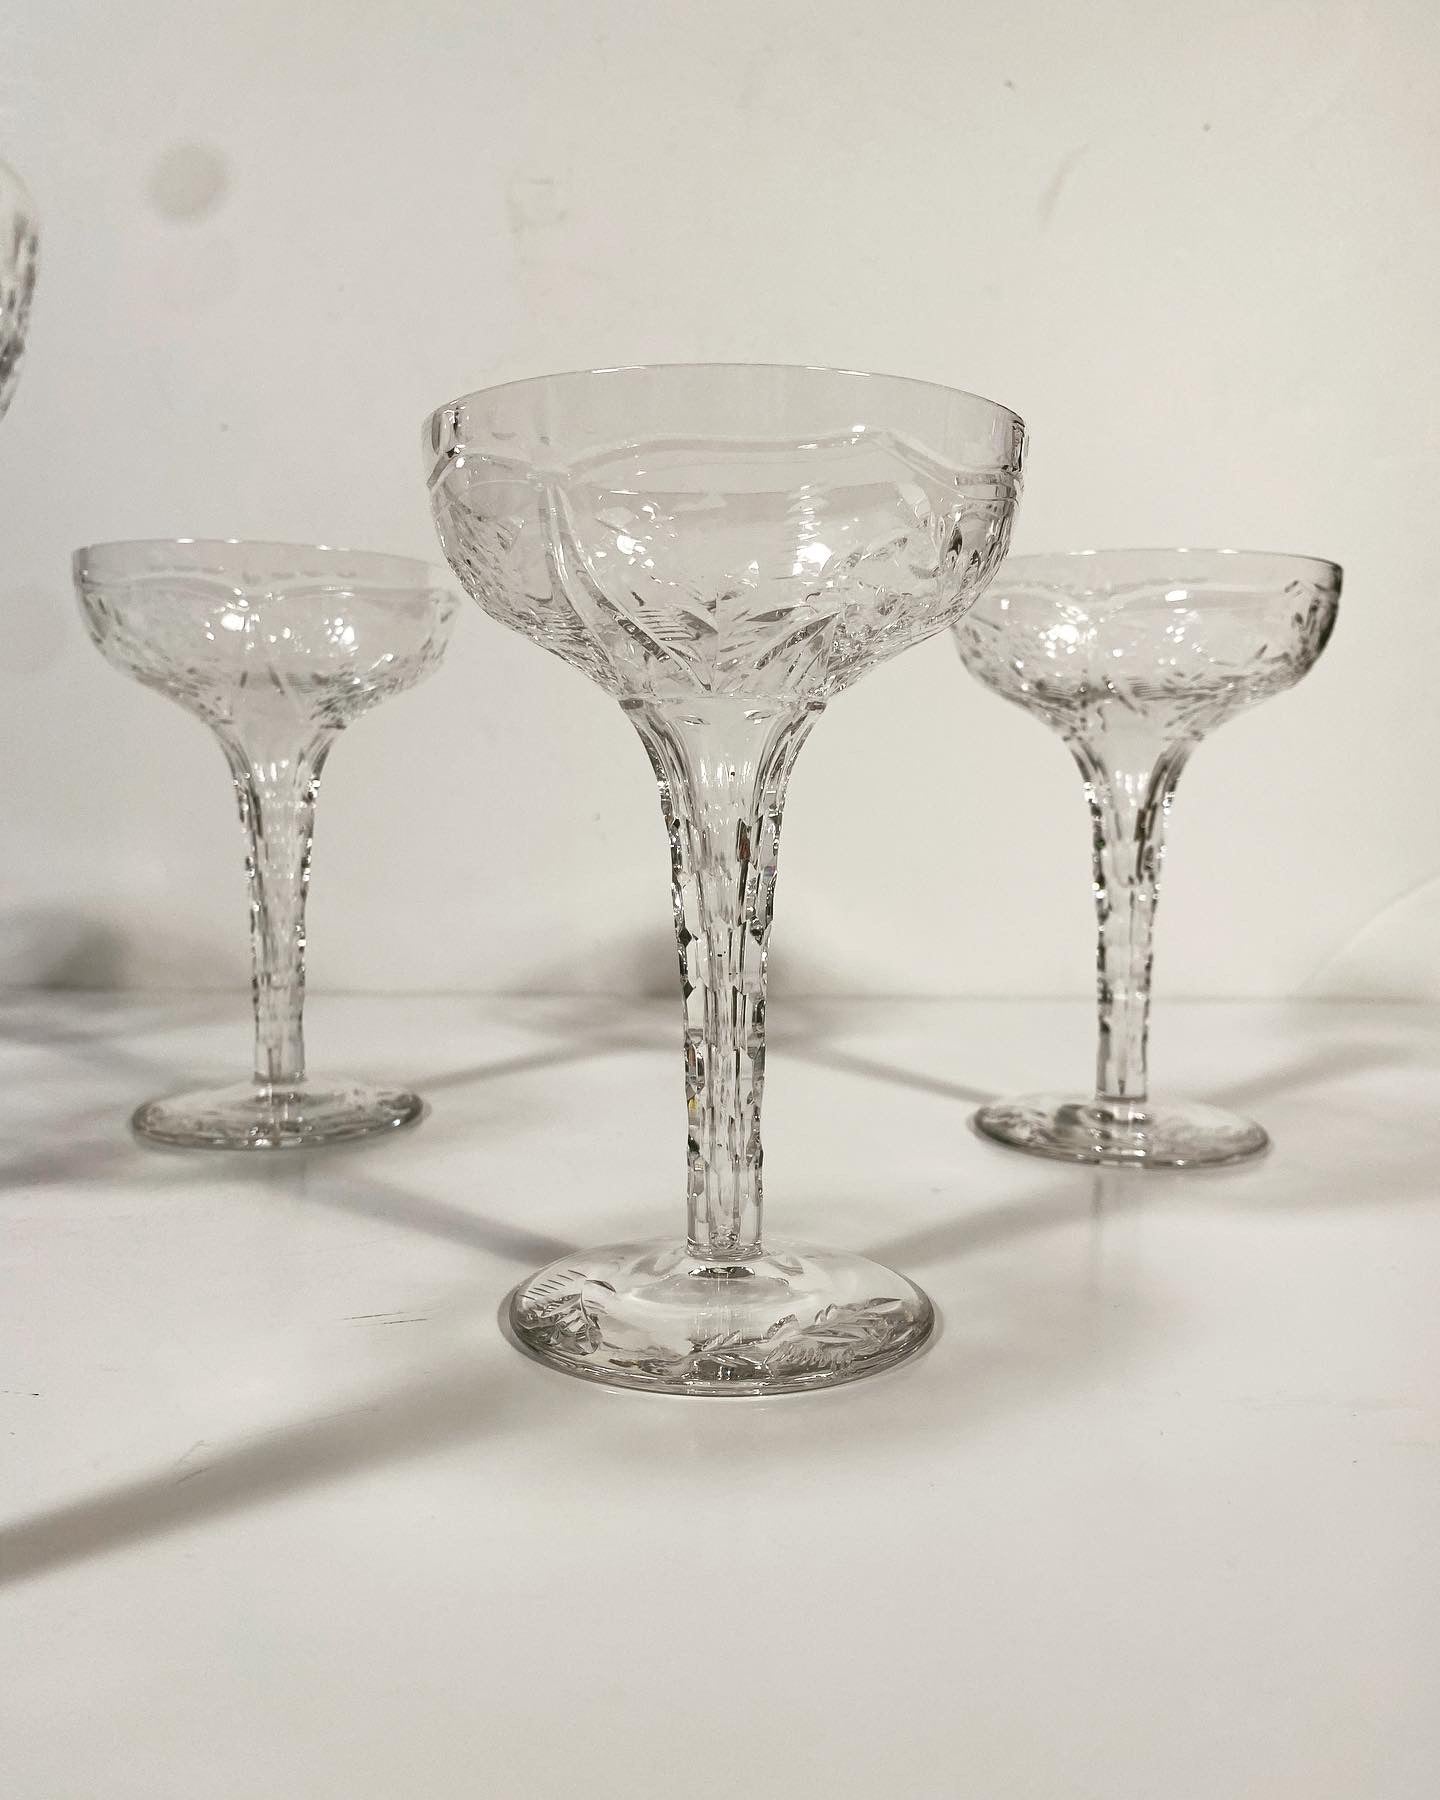 1940’s Libbey Rock Sharpe Champagne Coupes With Hollow Stem - Set of 6